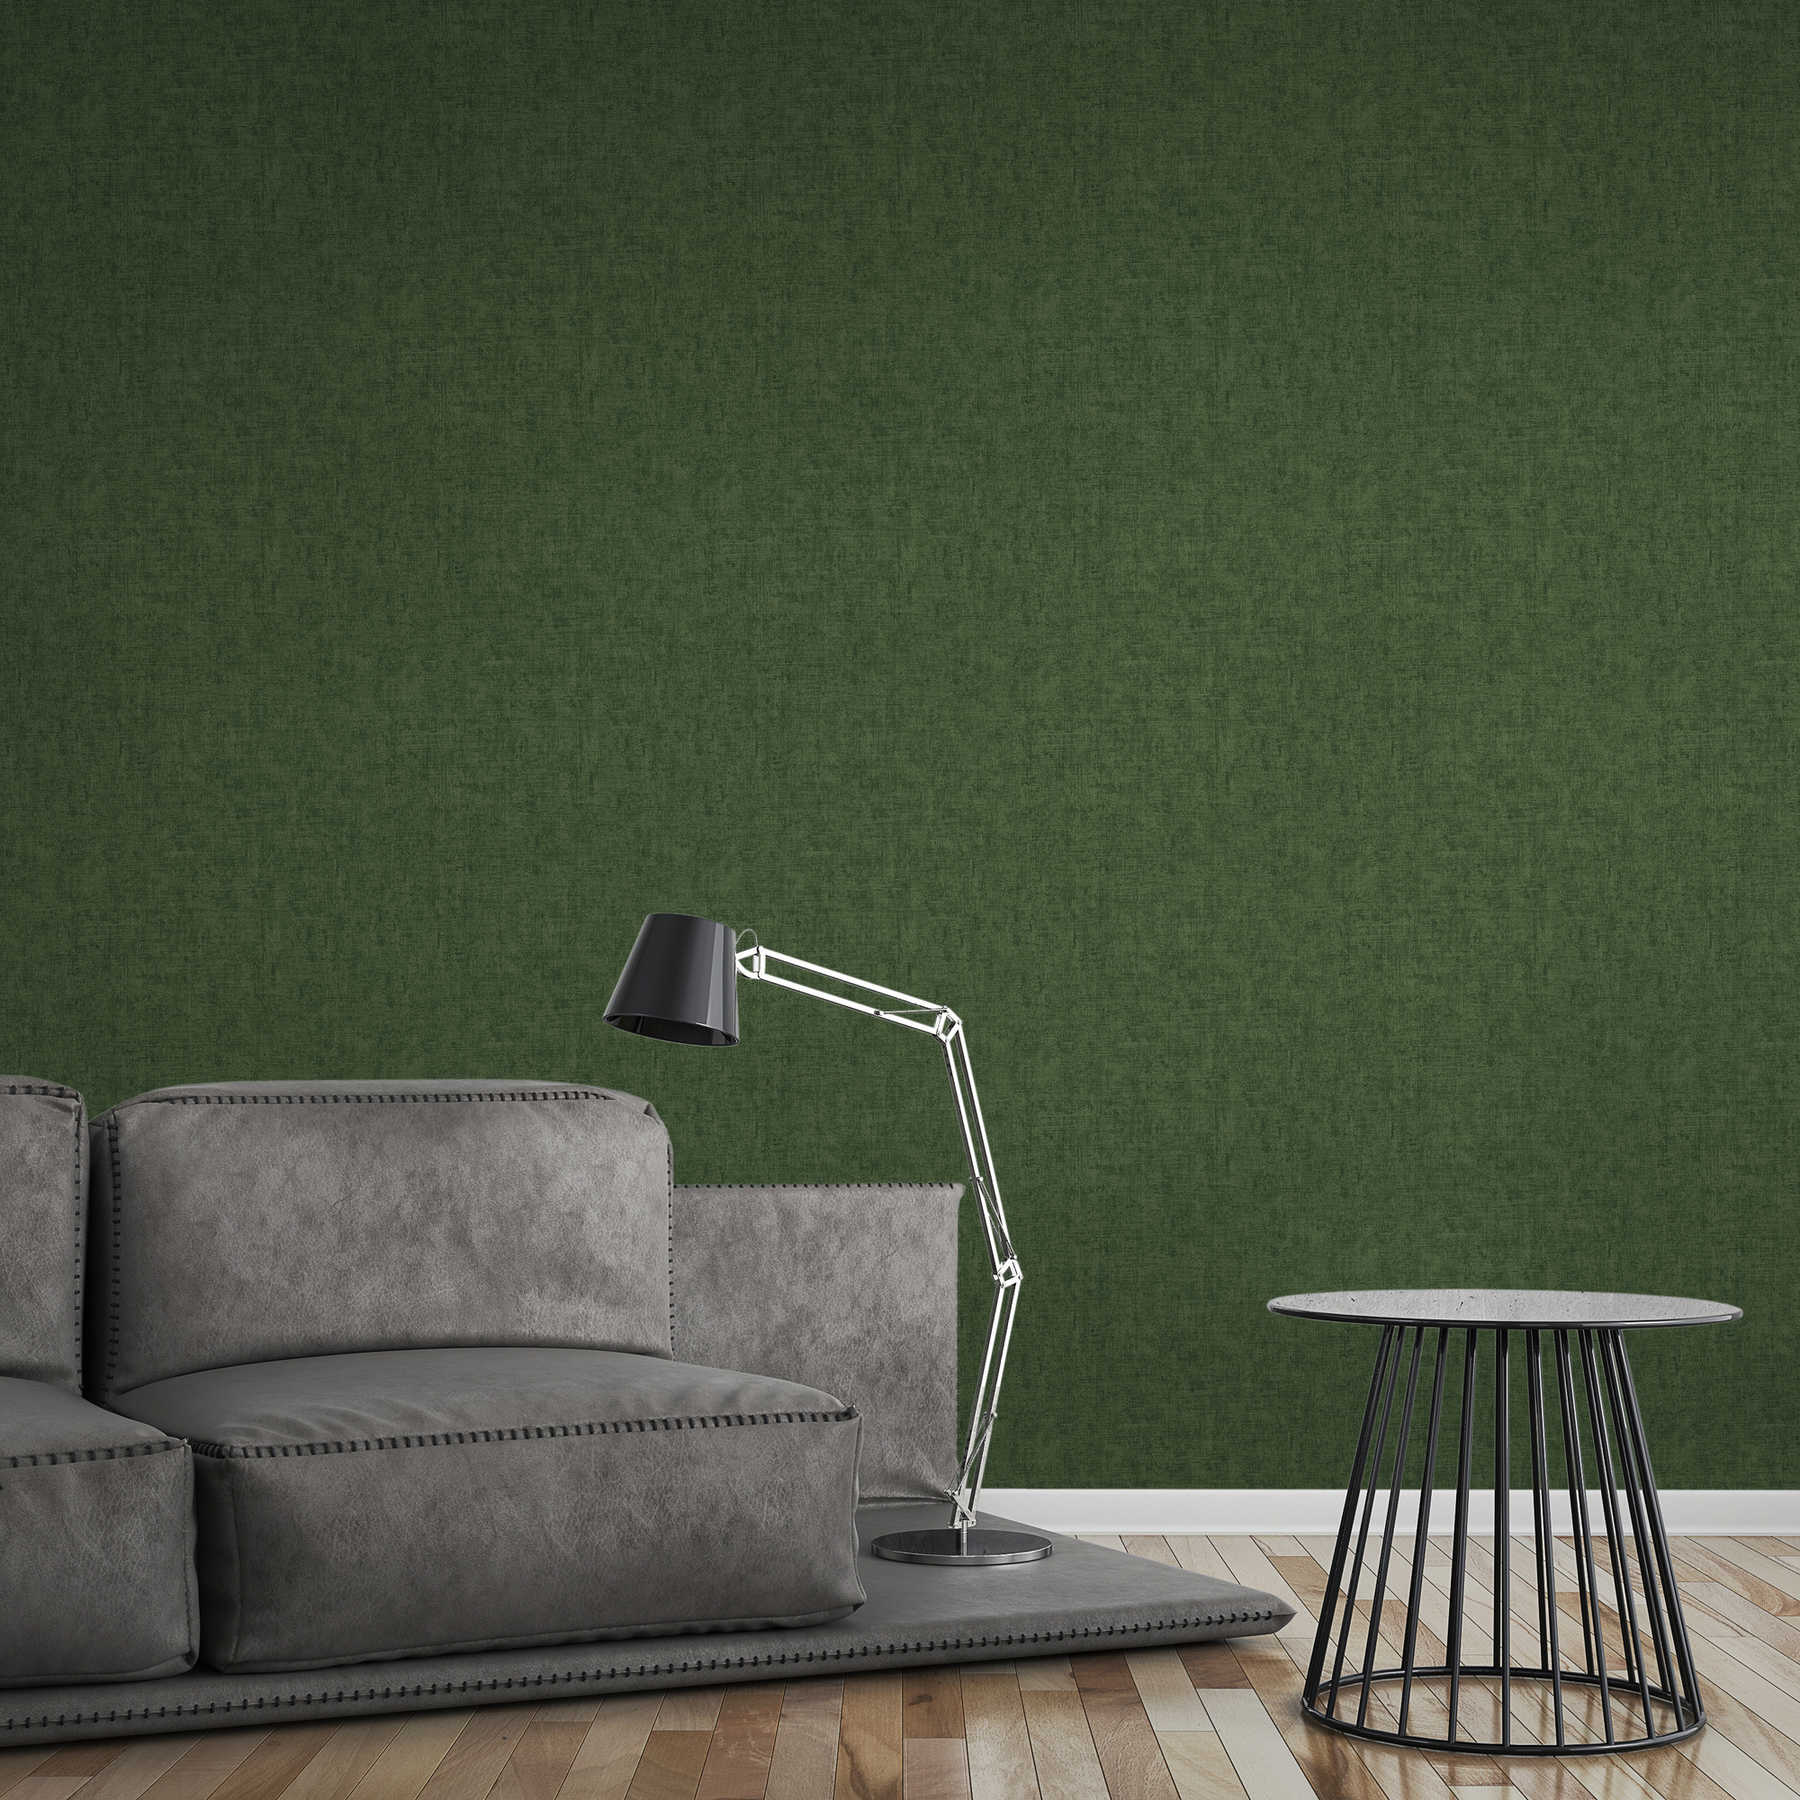             Melange plain wallpaper jungle green with structure embossing
        